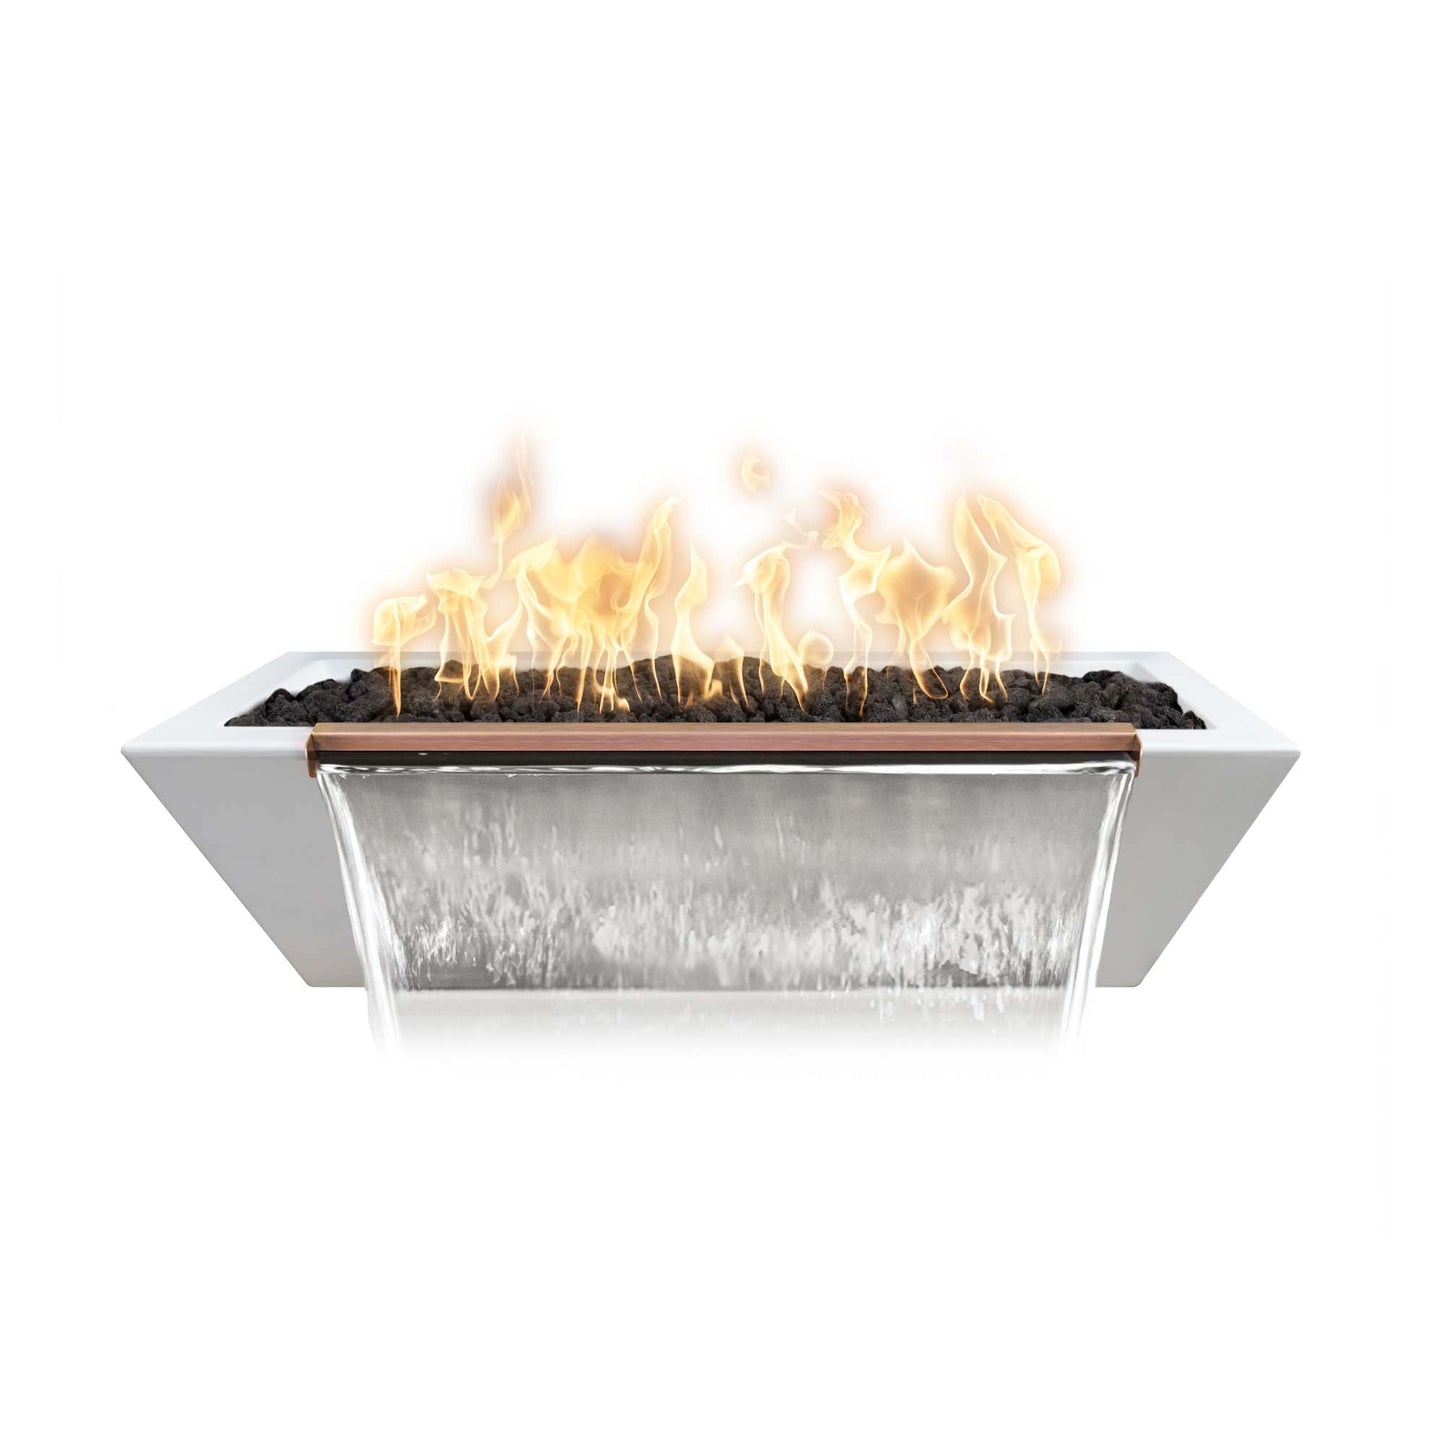 The Outdoor Plus Linear Maya 72" Natural Gray GFRC Concrete Liquid Propane Fire & Water Bowl with Match Lit with Flame Sense Ignition